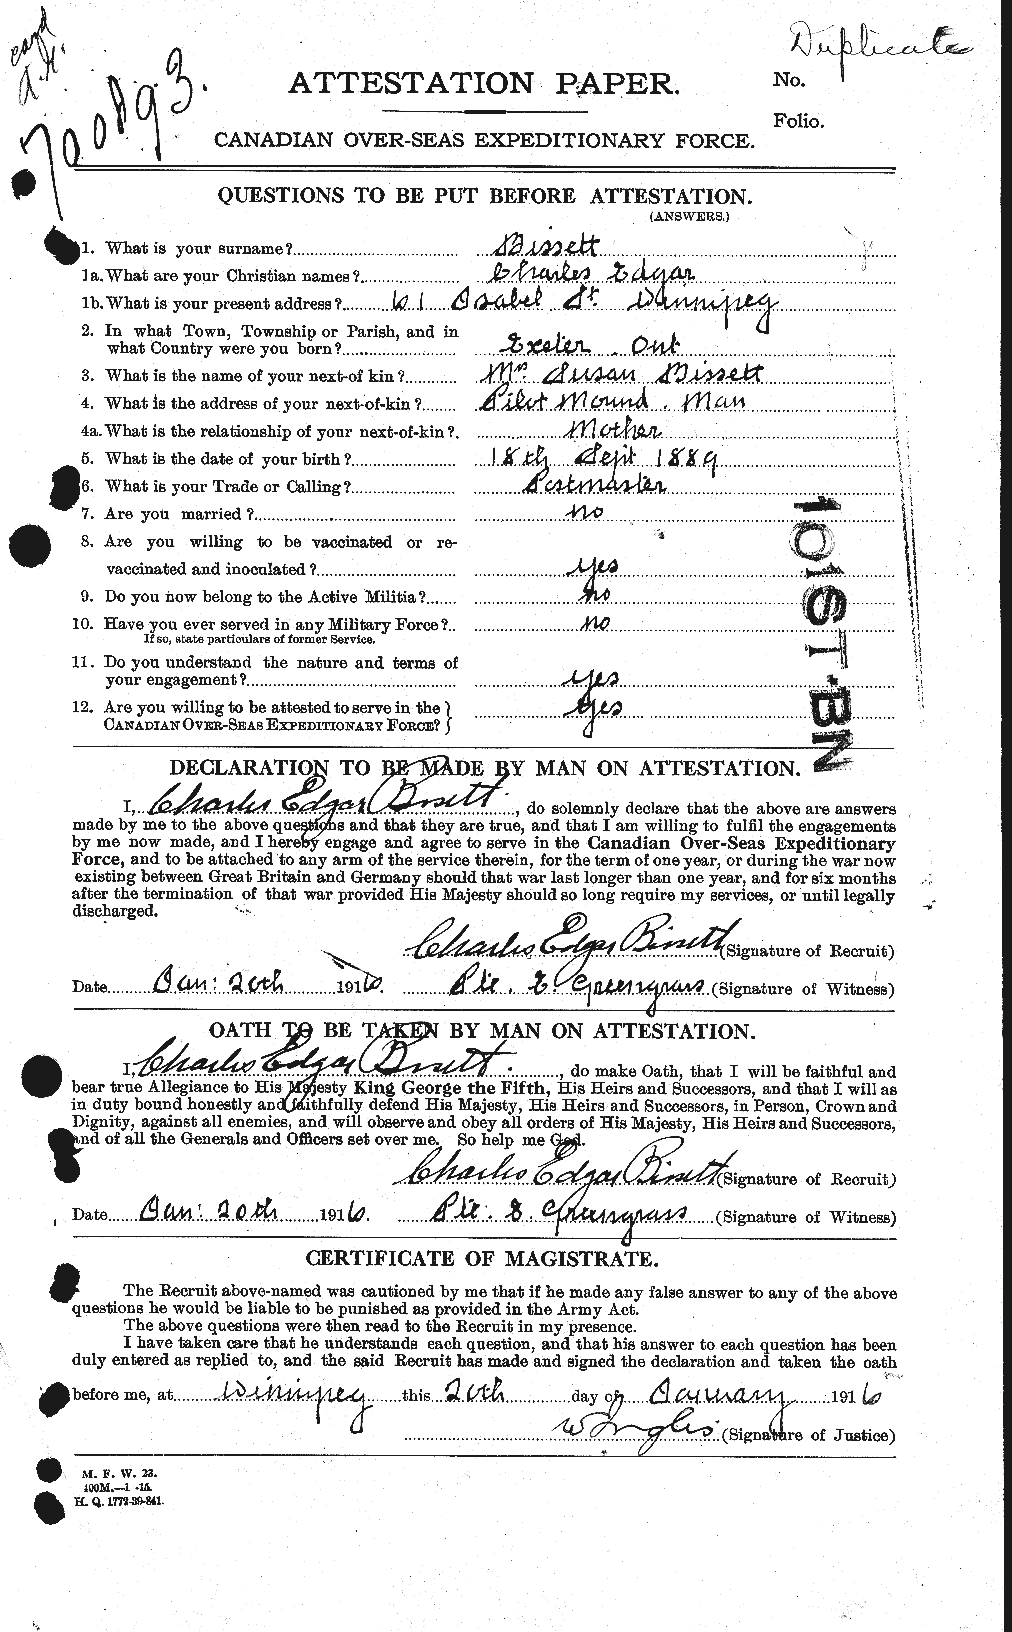 Personnel Records of the First World War - CEF 245752a